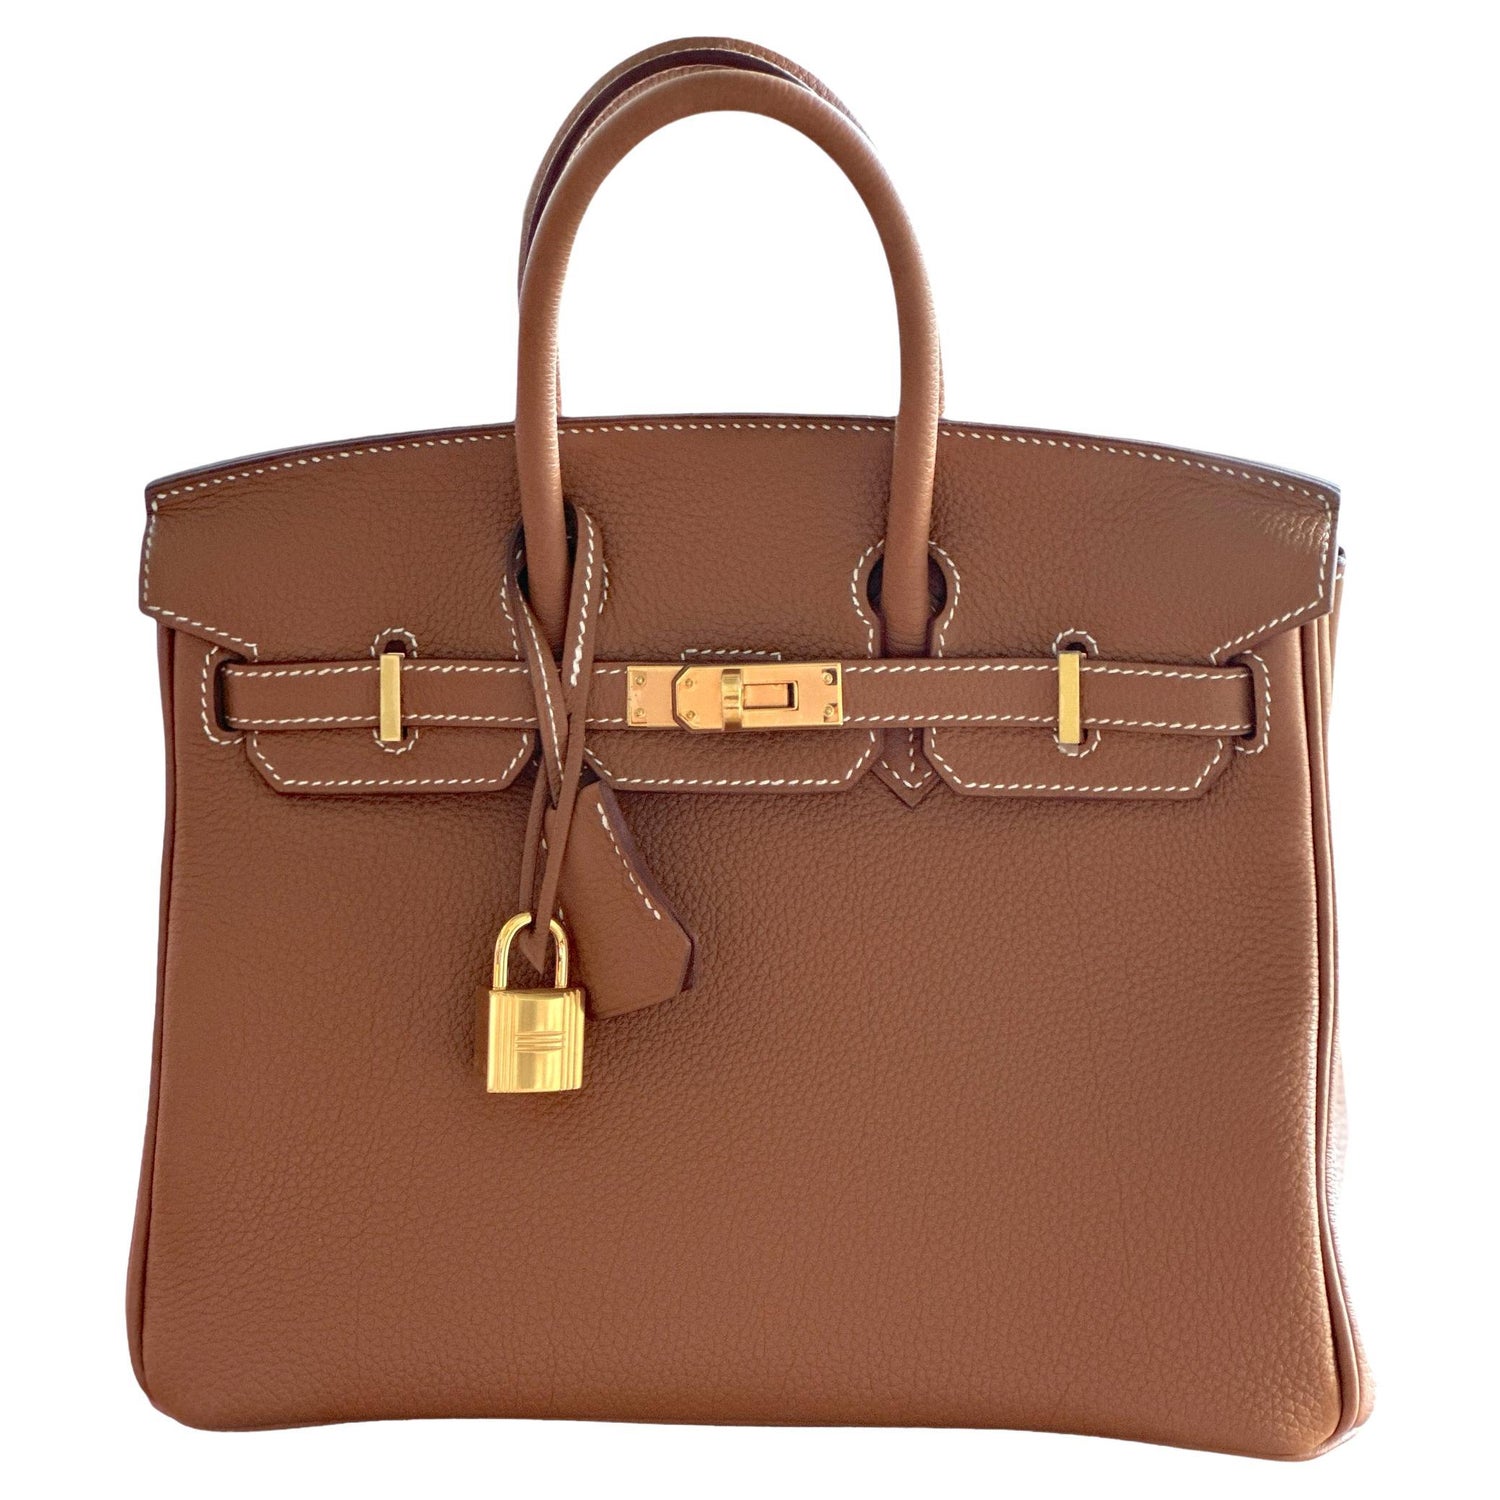 BRAND NEW HERMES KELLY 25 BARENIA FAUBOURG W/ QUALITY ISSUE *Why I